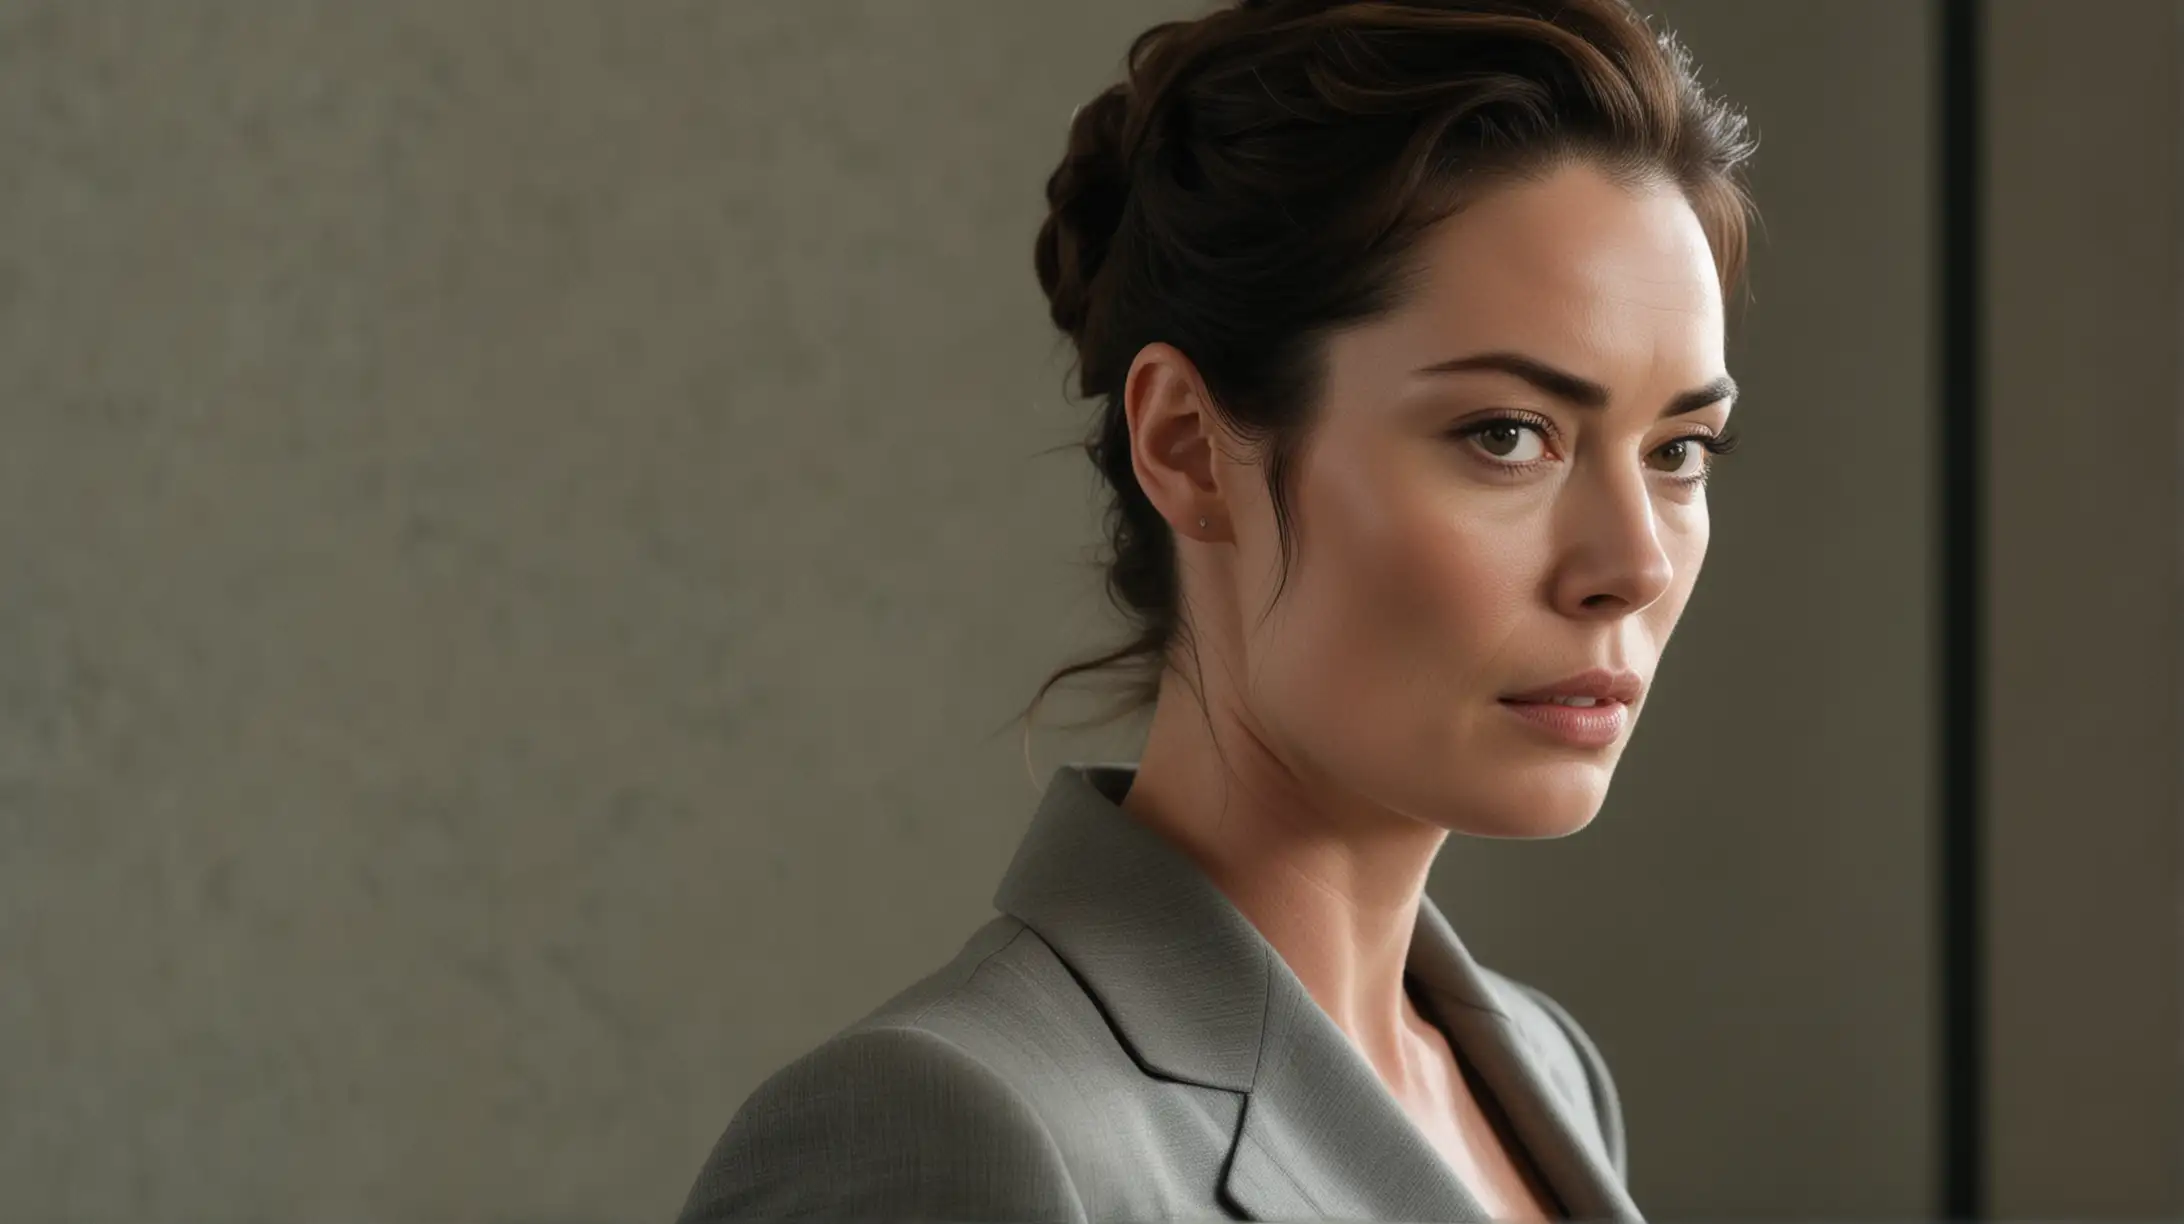 Resilient Woman in Cinematic Still Determined Character Resembling Lena Headey